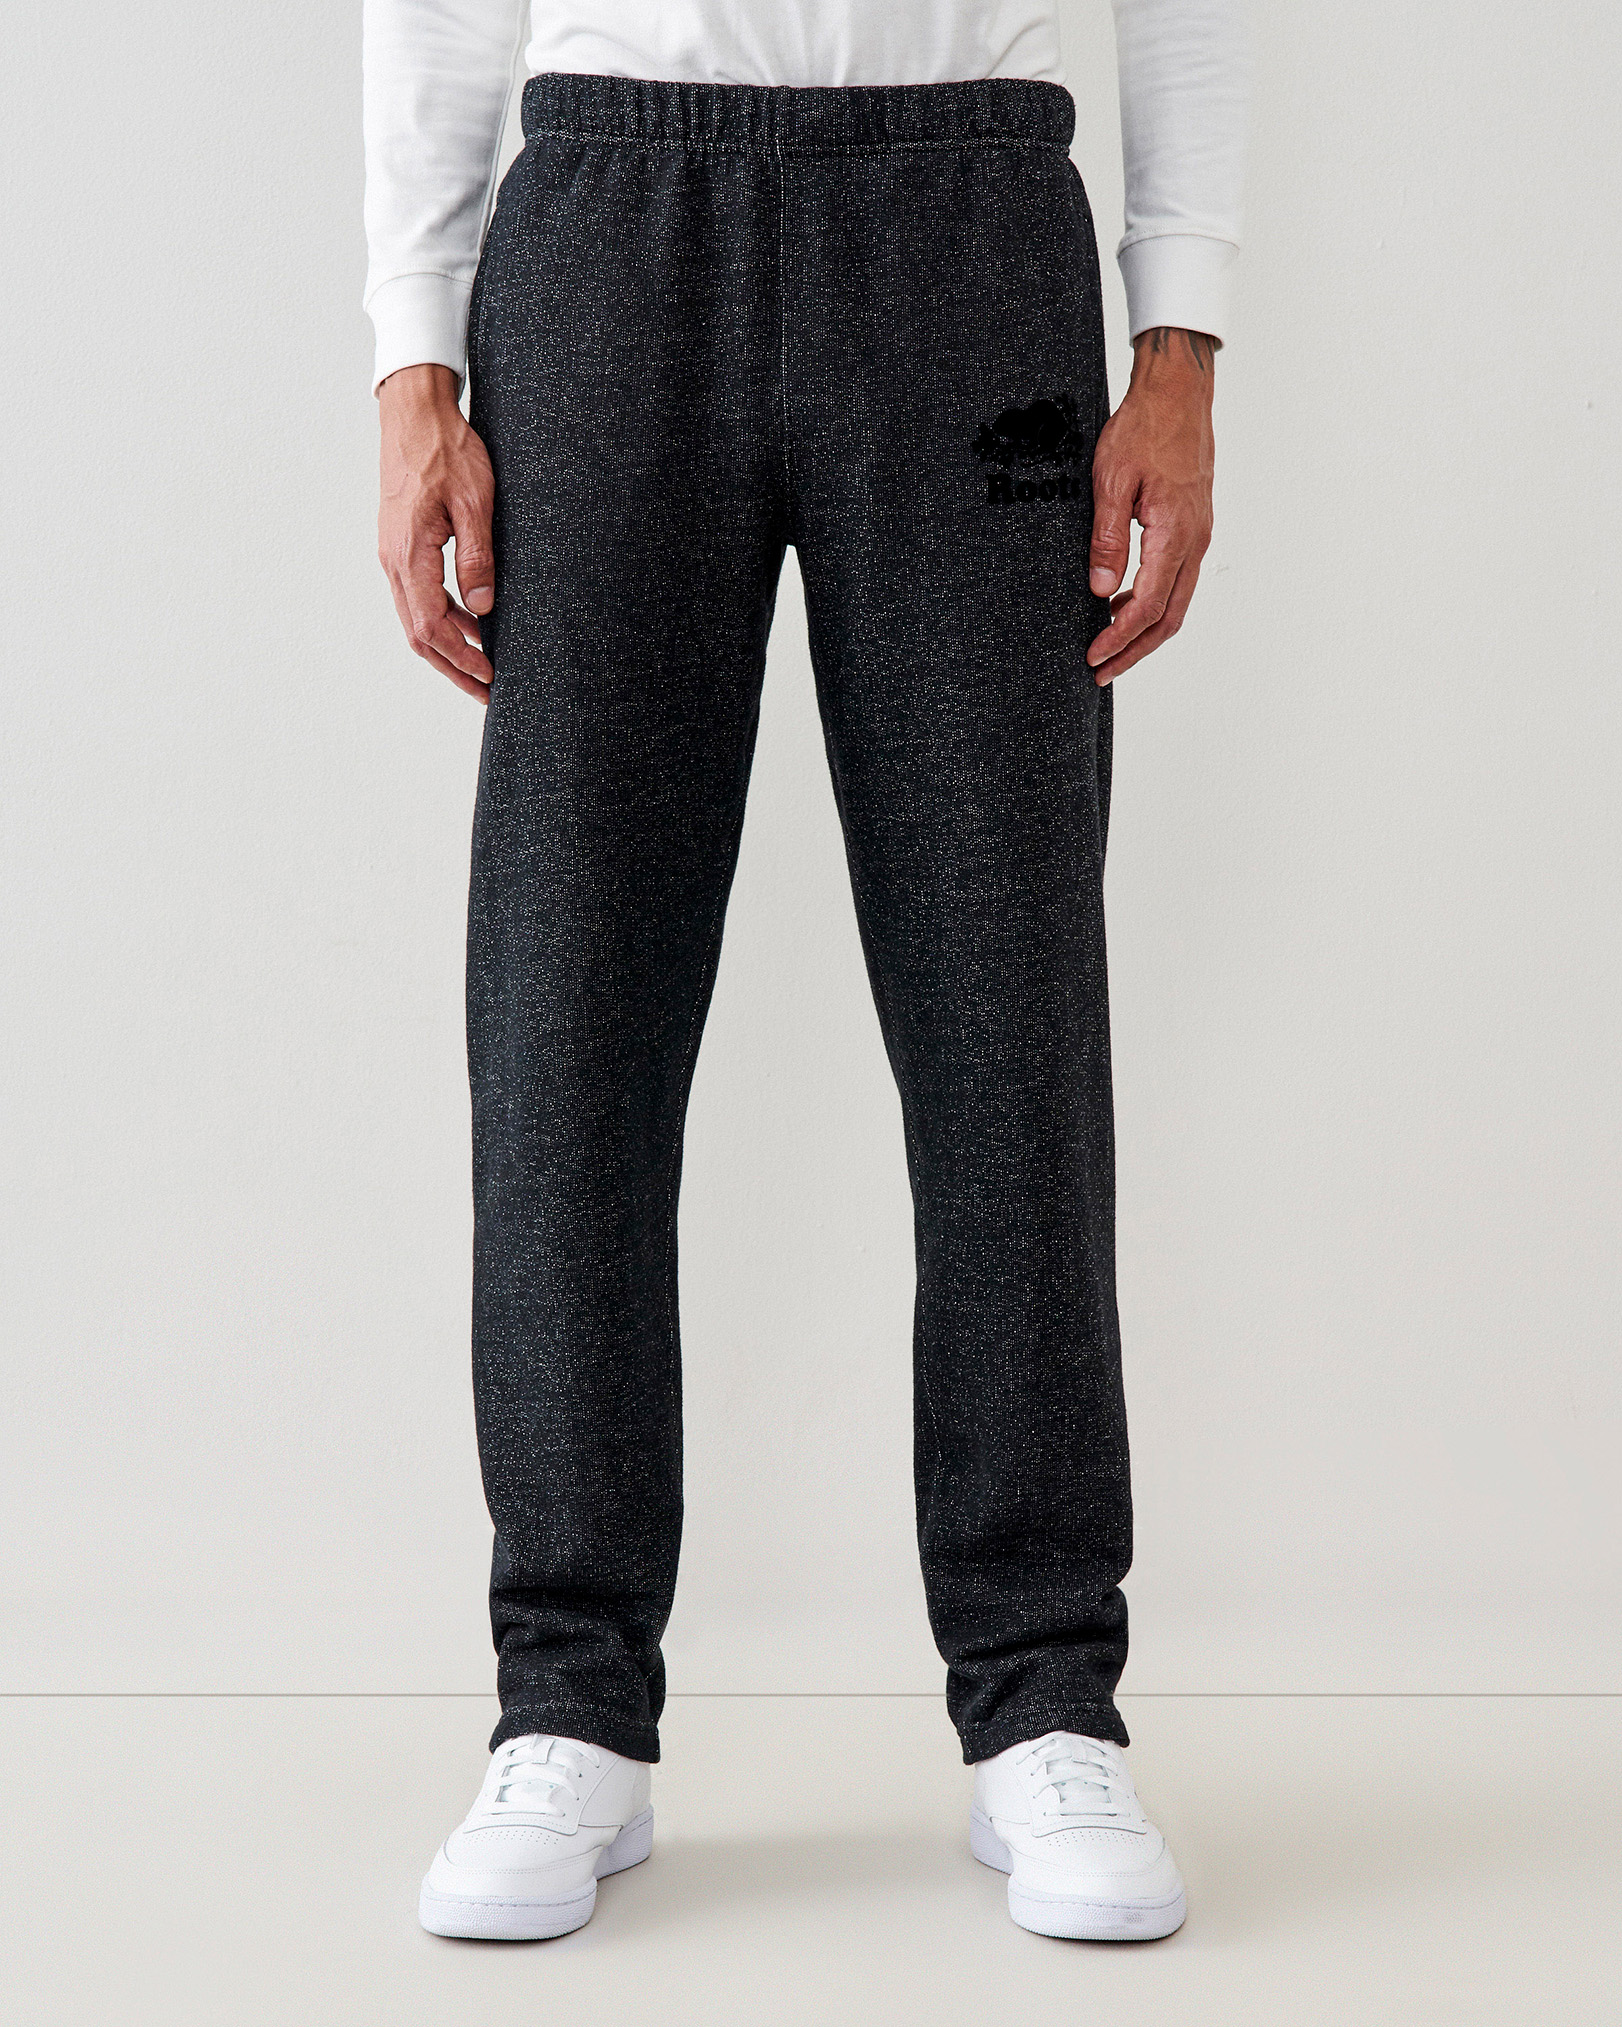 Roots Heritage Sweatpant in Black Pepper